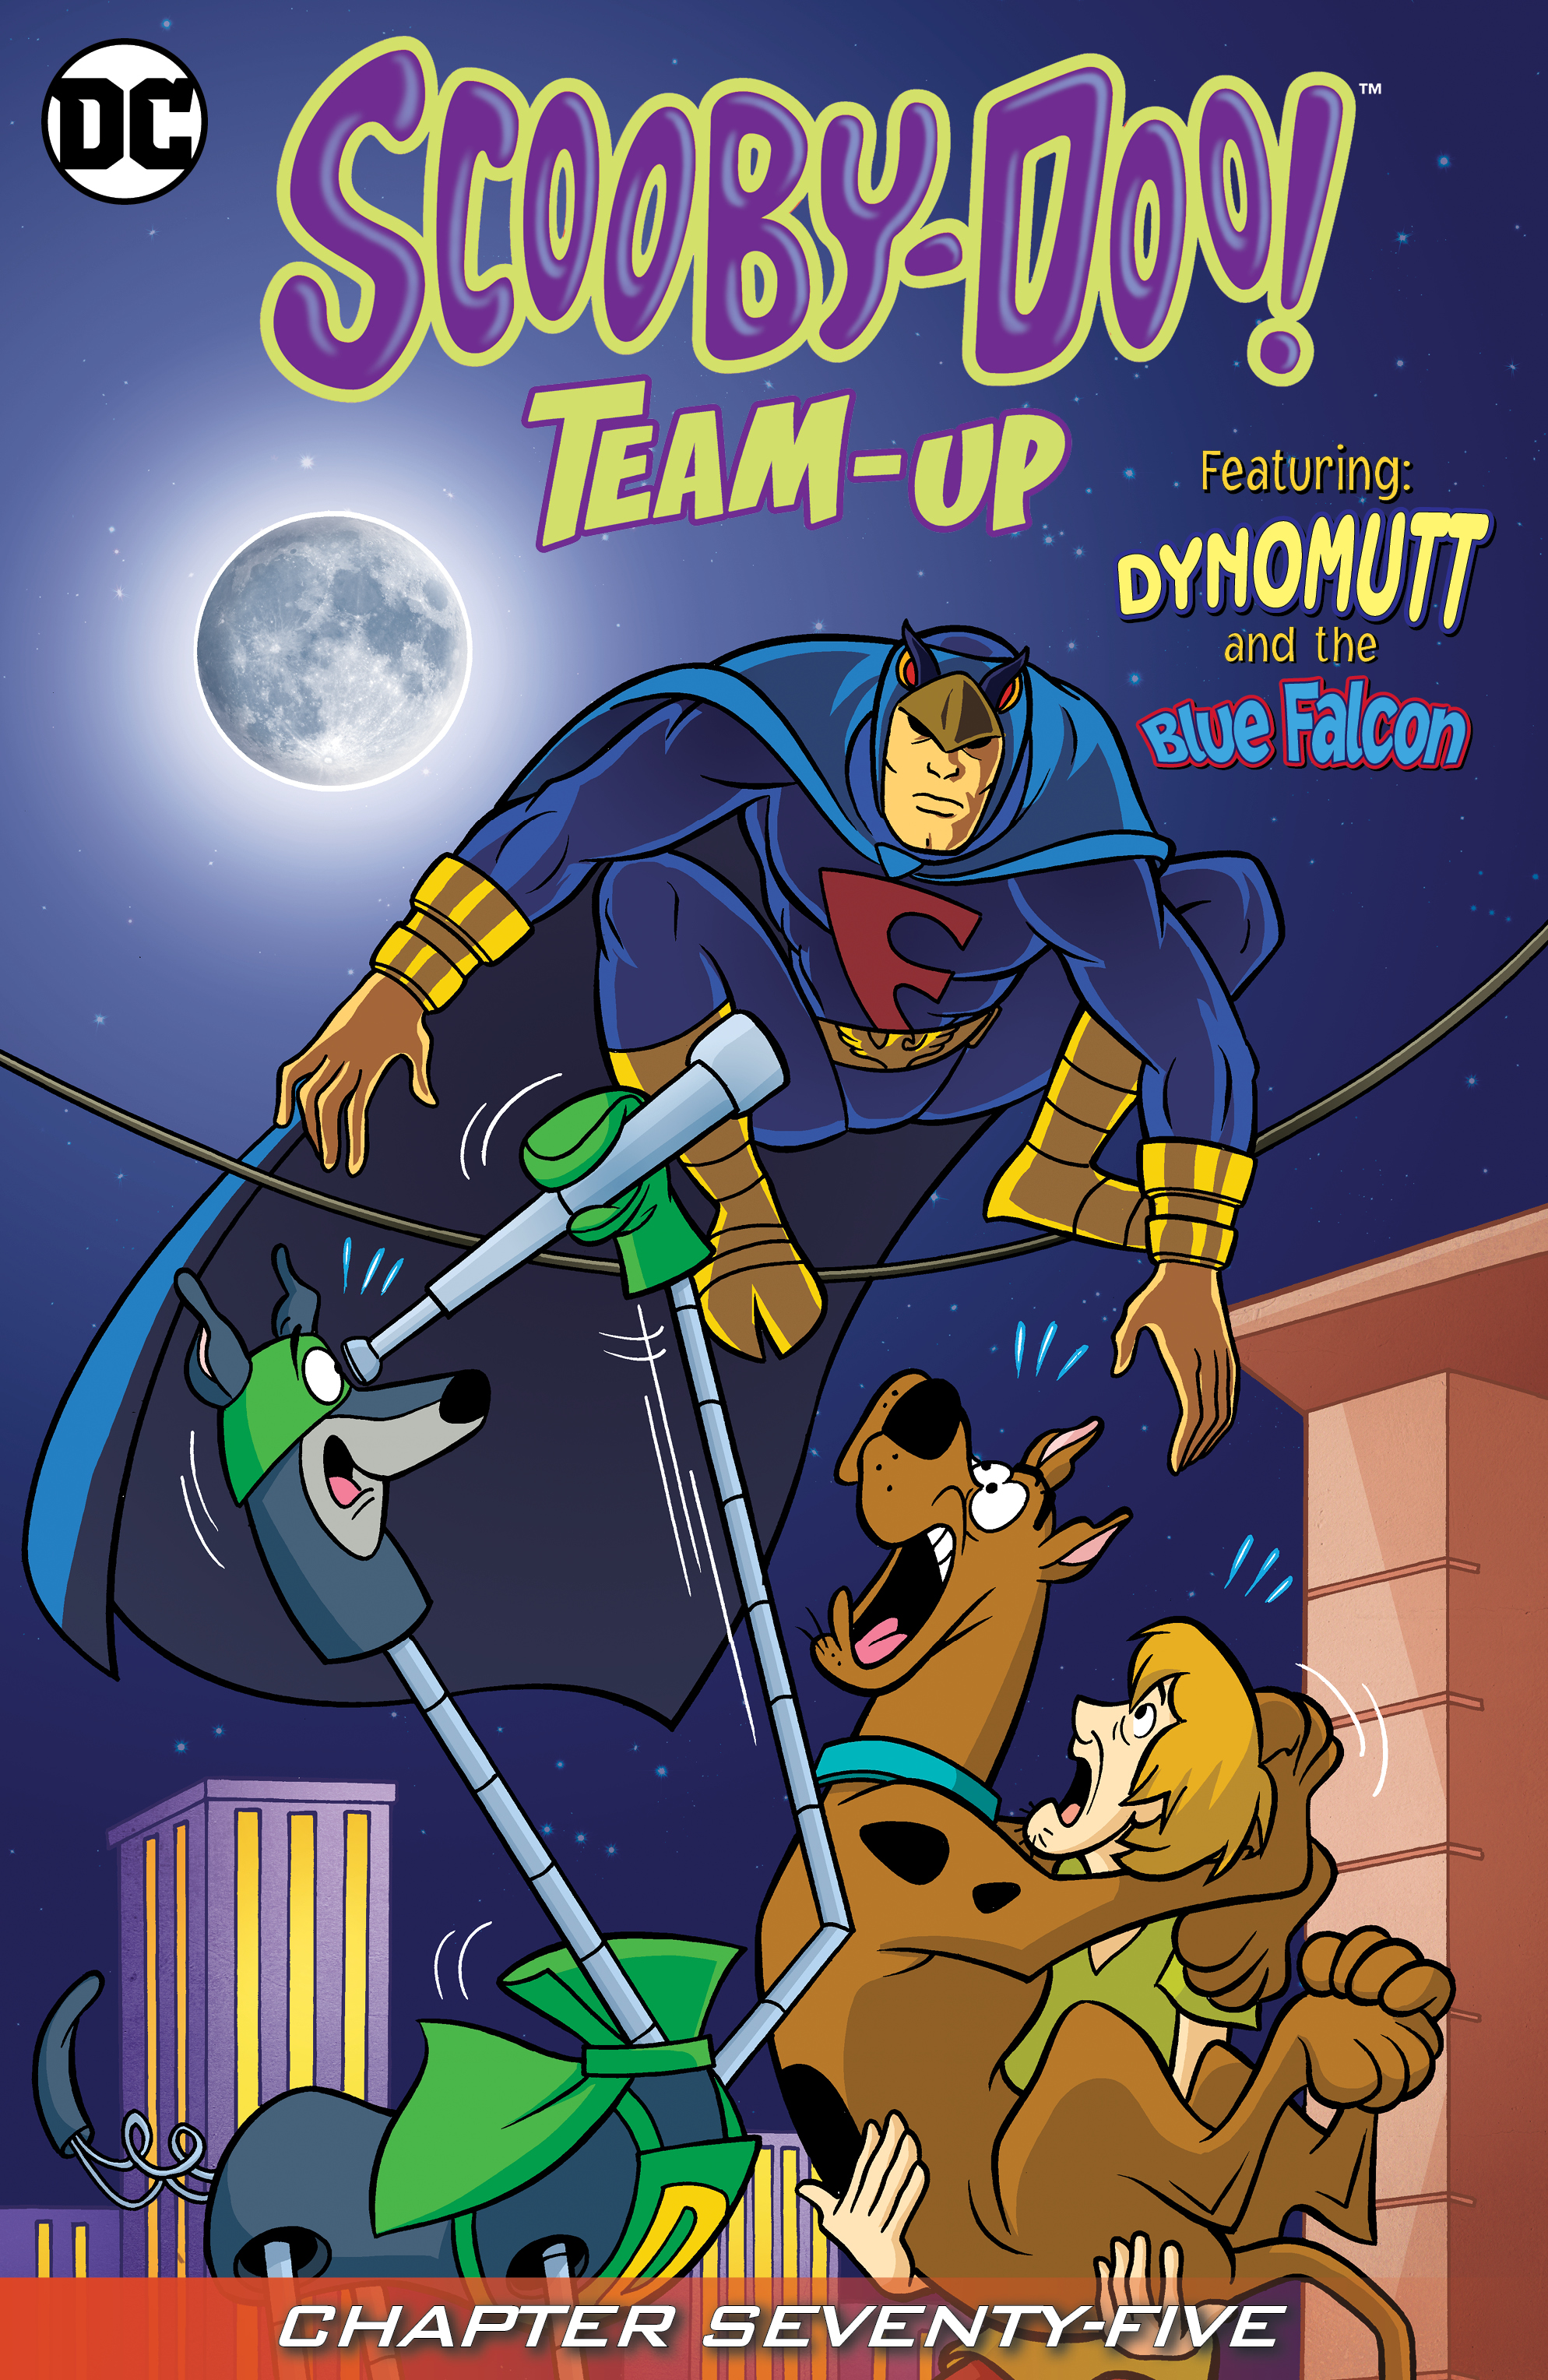 Scooby-Doo Team-Up #75 preview images